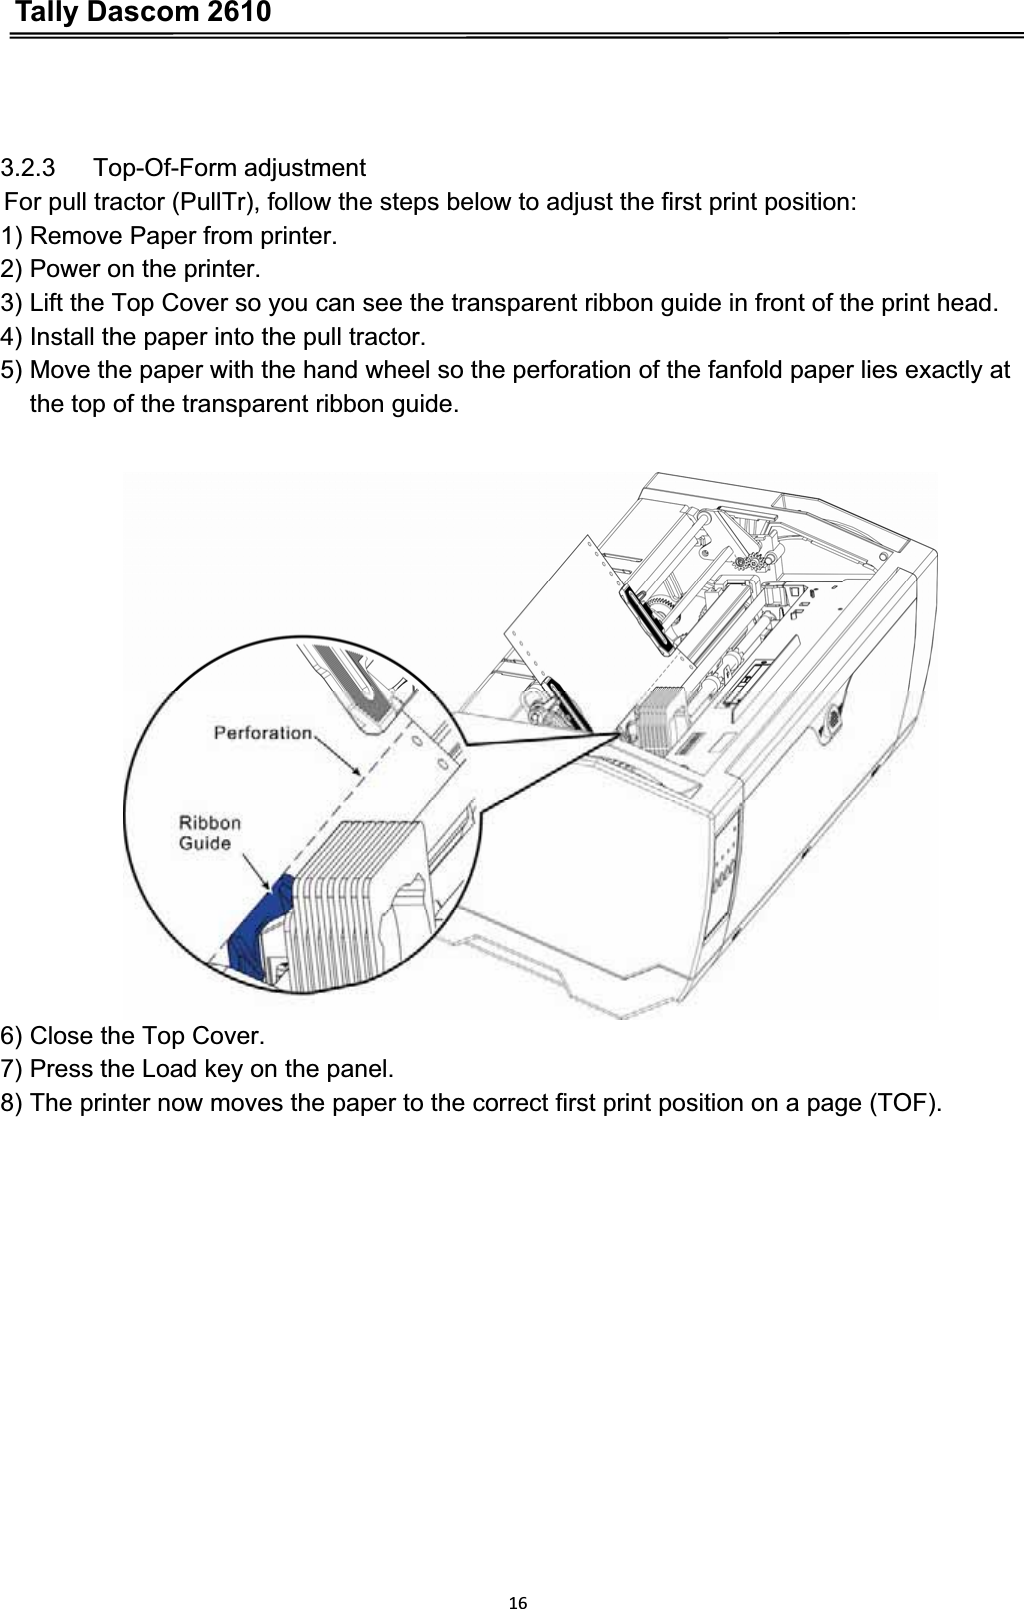 Tally Dascom 2610163.2.3   Top-Of-Form adjustment For pull tractor (PullTr), follow the steps below to adjust the first print position: 1) Remove Paper from printer. 2) Power on the printer. 3) Lift the Top Cover so you can see the transparent ribbon guide in front of the print head. 4) Install the paper into the pull tractor. 5) Move the paper with the hand wheel so the perforation of the fanfold paper lies exactly at   the top of the transparent ribbon guide. 6) Close the Top Cover. 7) Press the Load key on the panel. 8) The printer now moves the paper to the correct first print position on a page (TOF). 